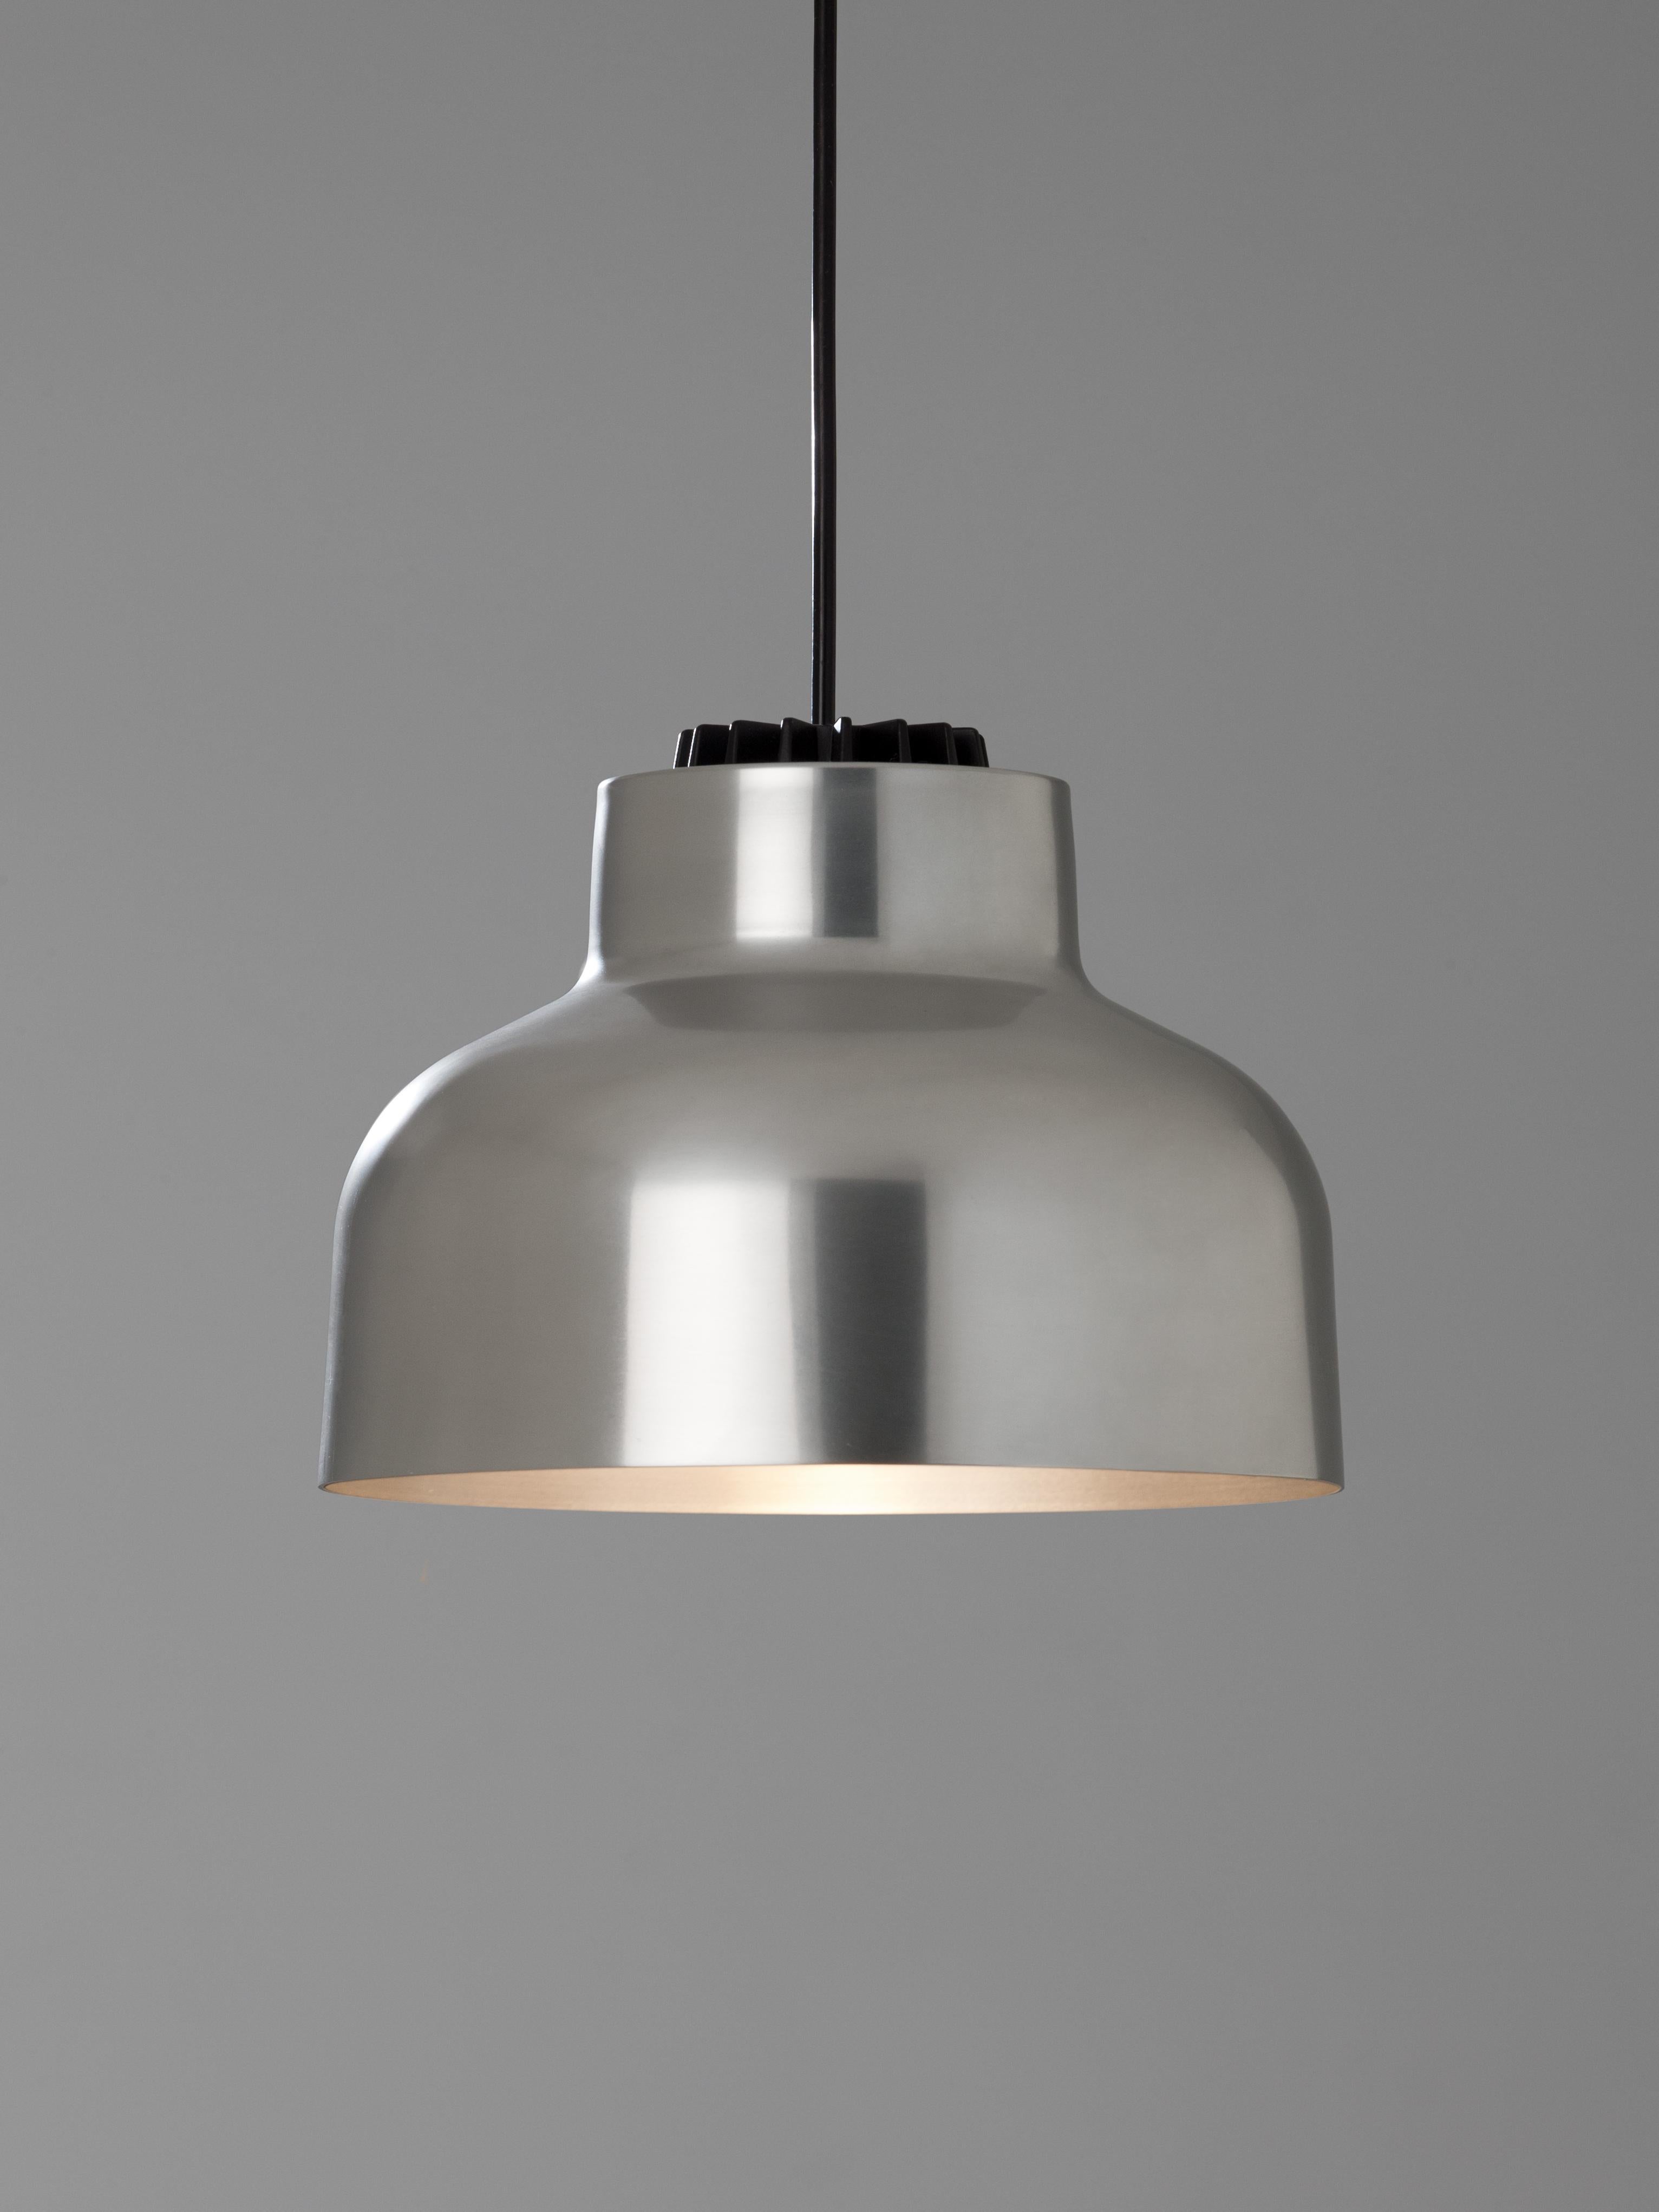 Polished Aluminum M64 pendant lamp by Miguel Mila.
Dimensions: D 22 x H 16 cm
Materials: Aluminum, plastic.
Cable lenght: 3mts.
Available in other colors. Available in 2 cable lenghts: 3mts, 8mts.
Available in 2 canopy colors: white or